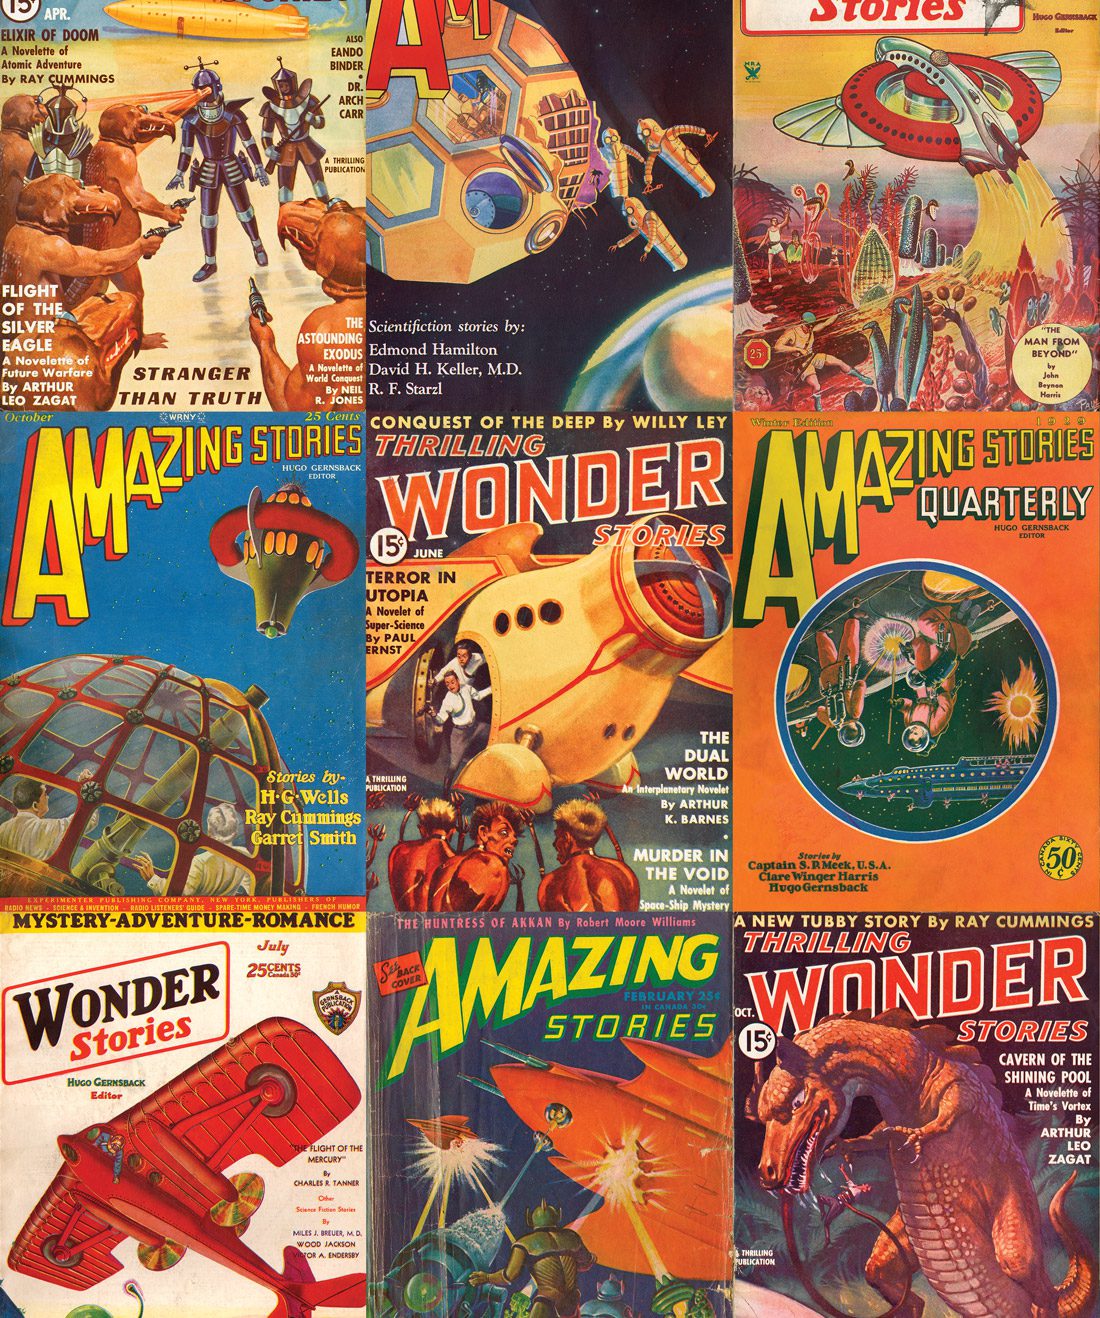 Wonder Book Cover Image Wallpapers